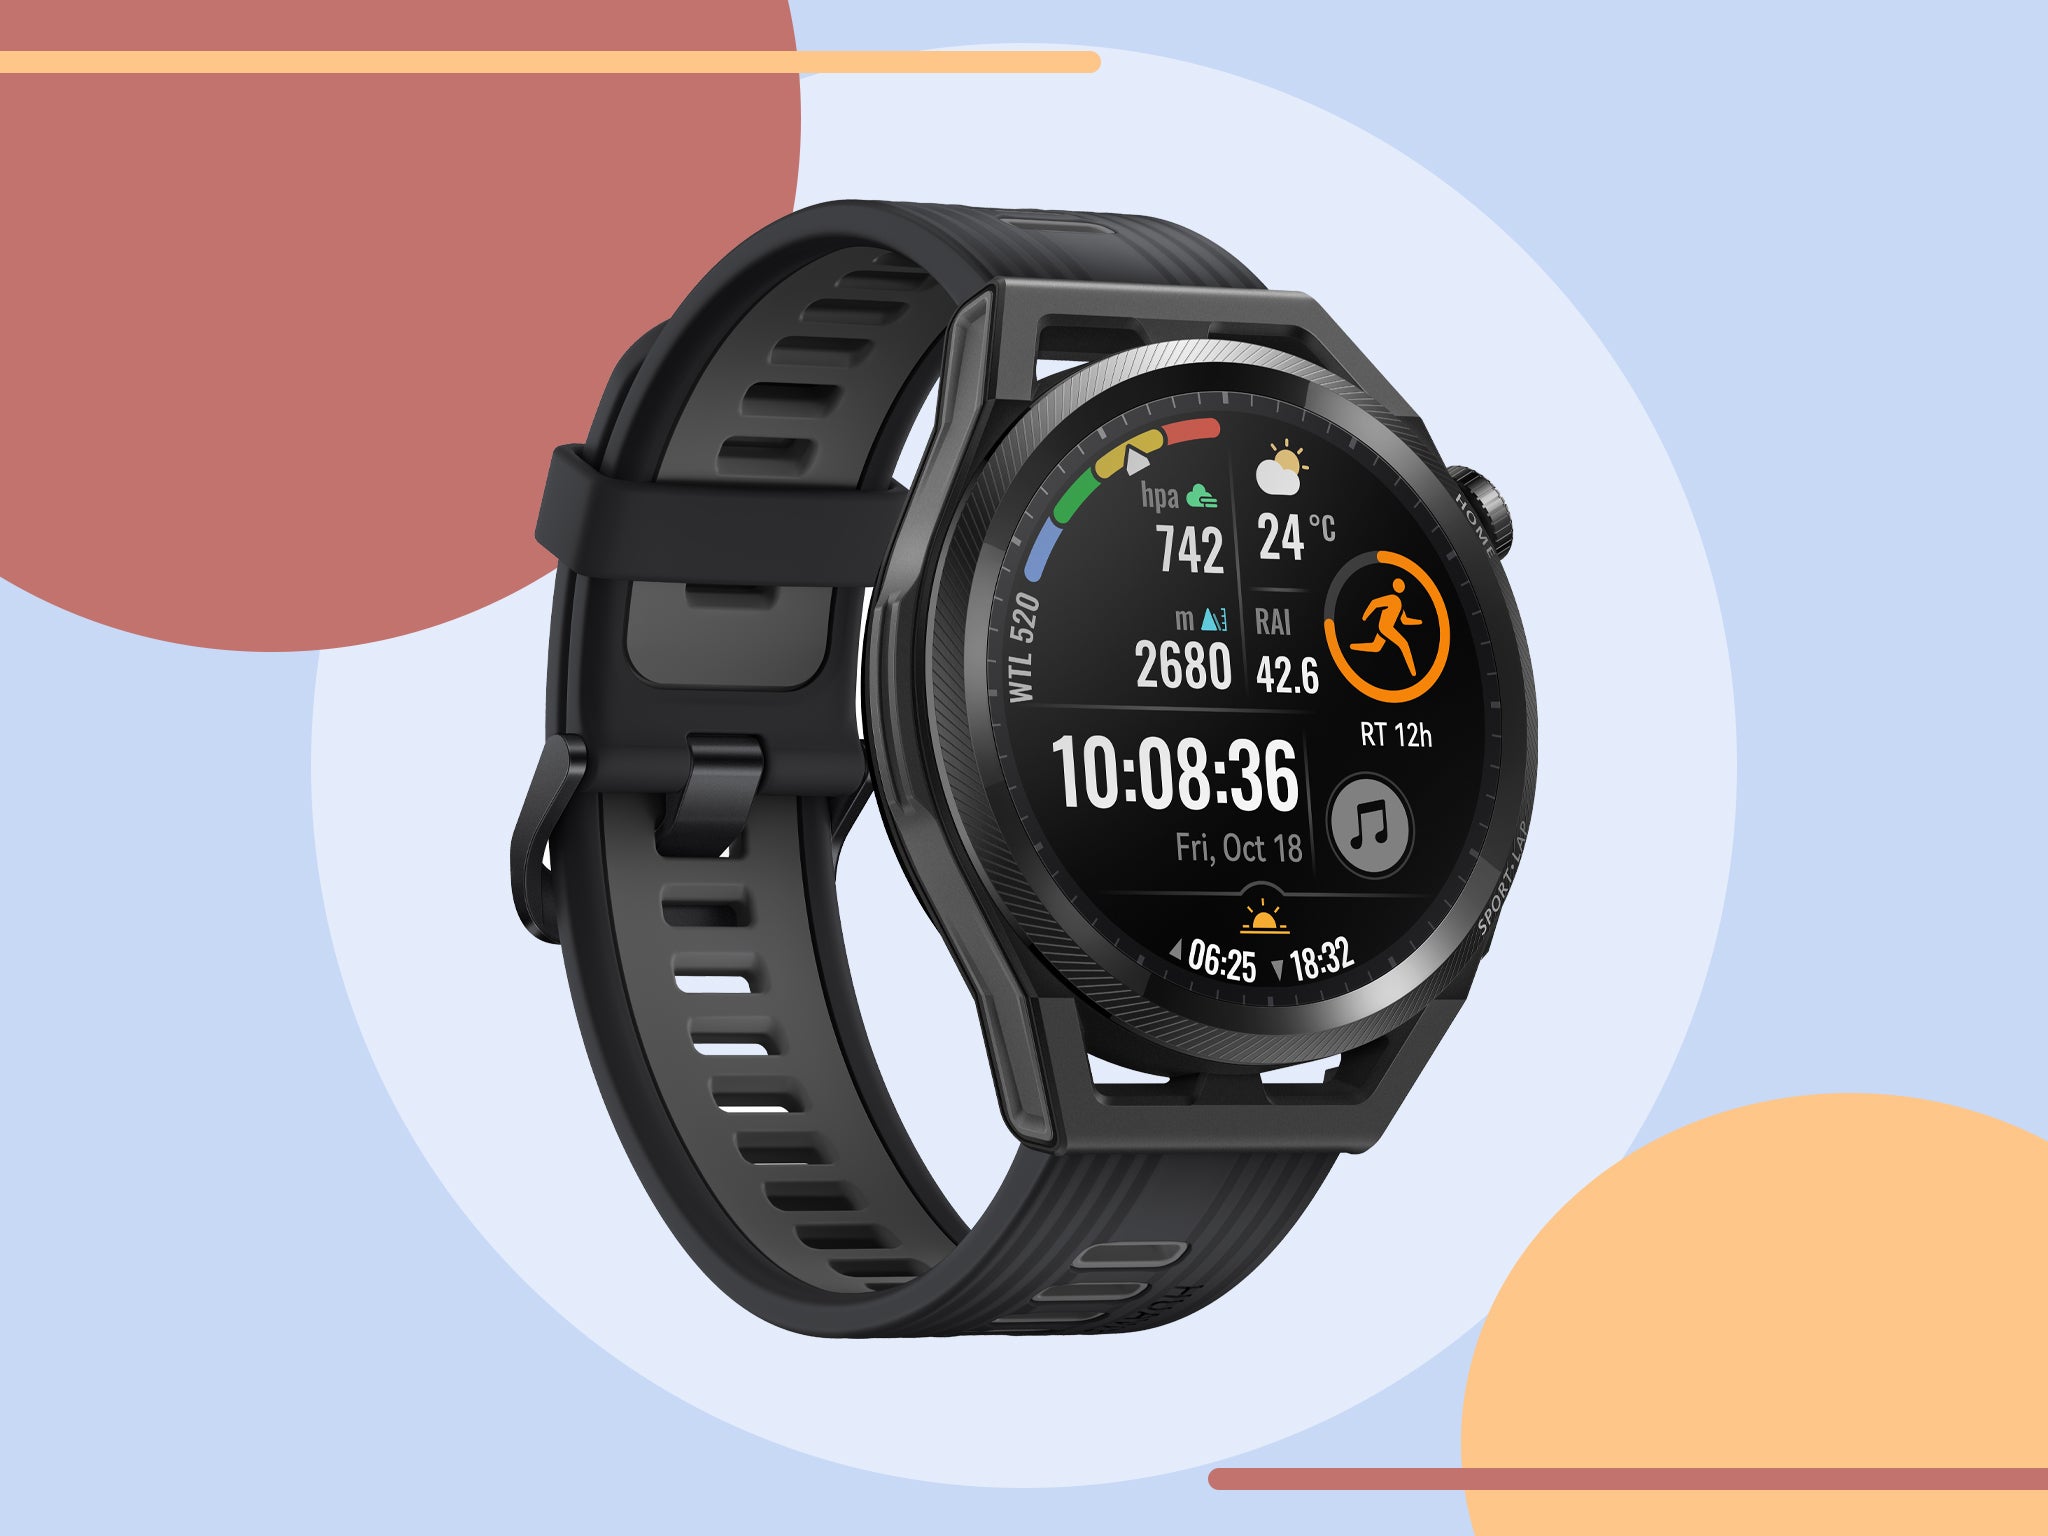 This feature-heavy tracker feels as light as a feather to wear